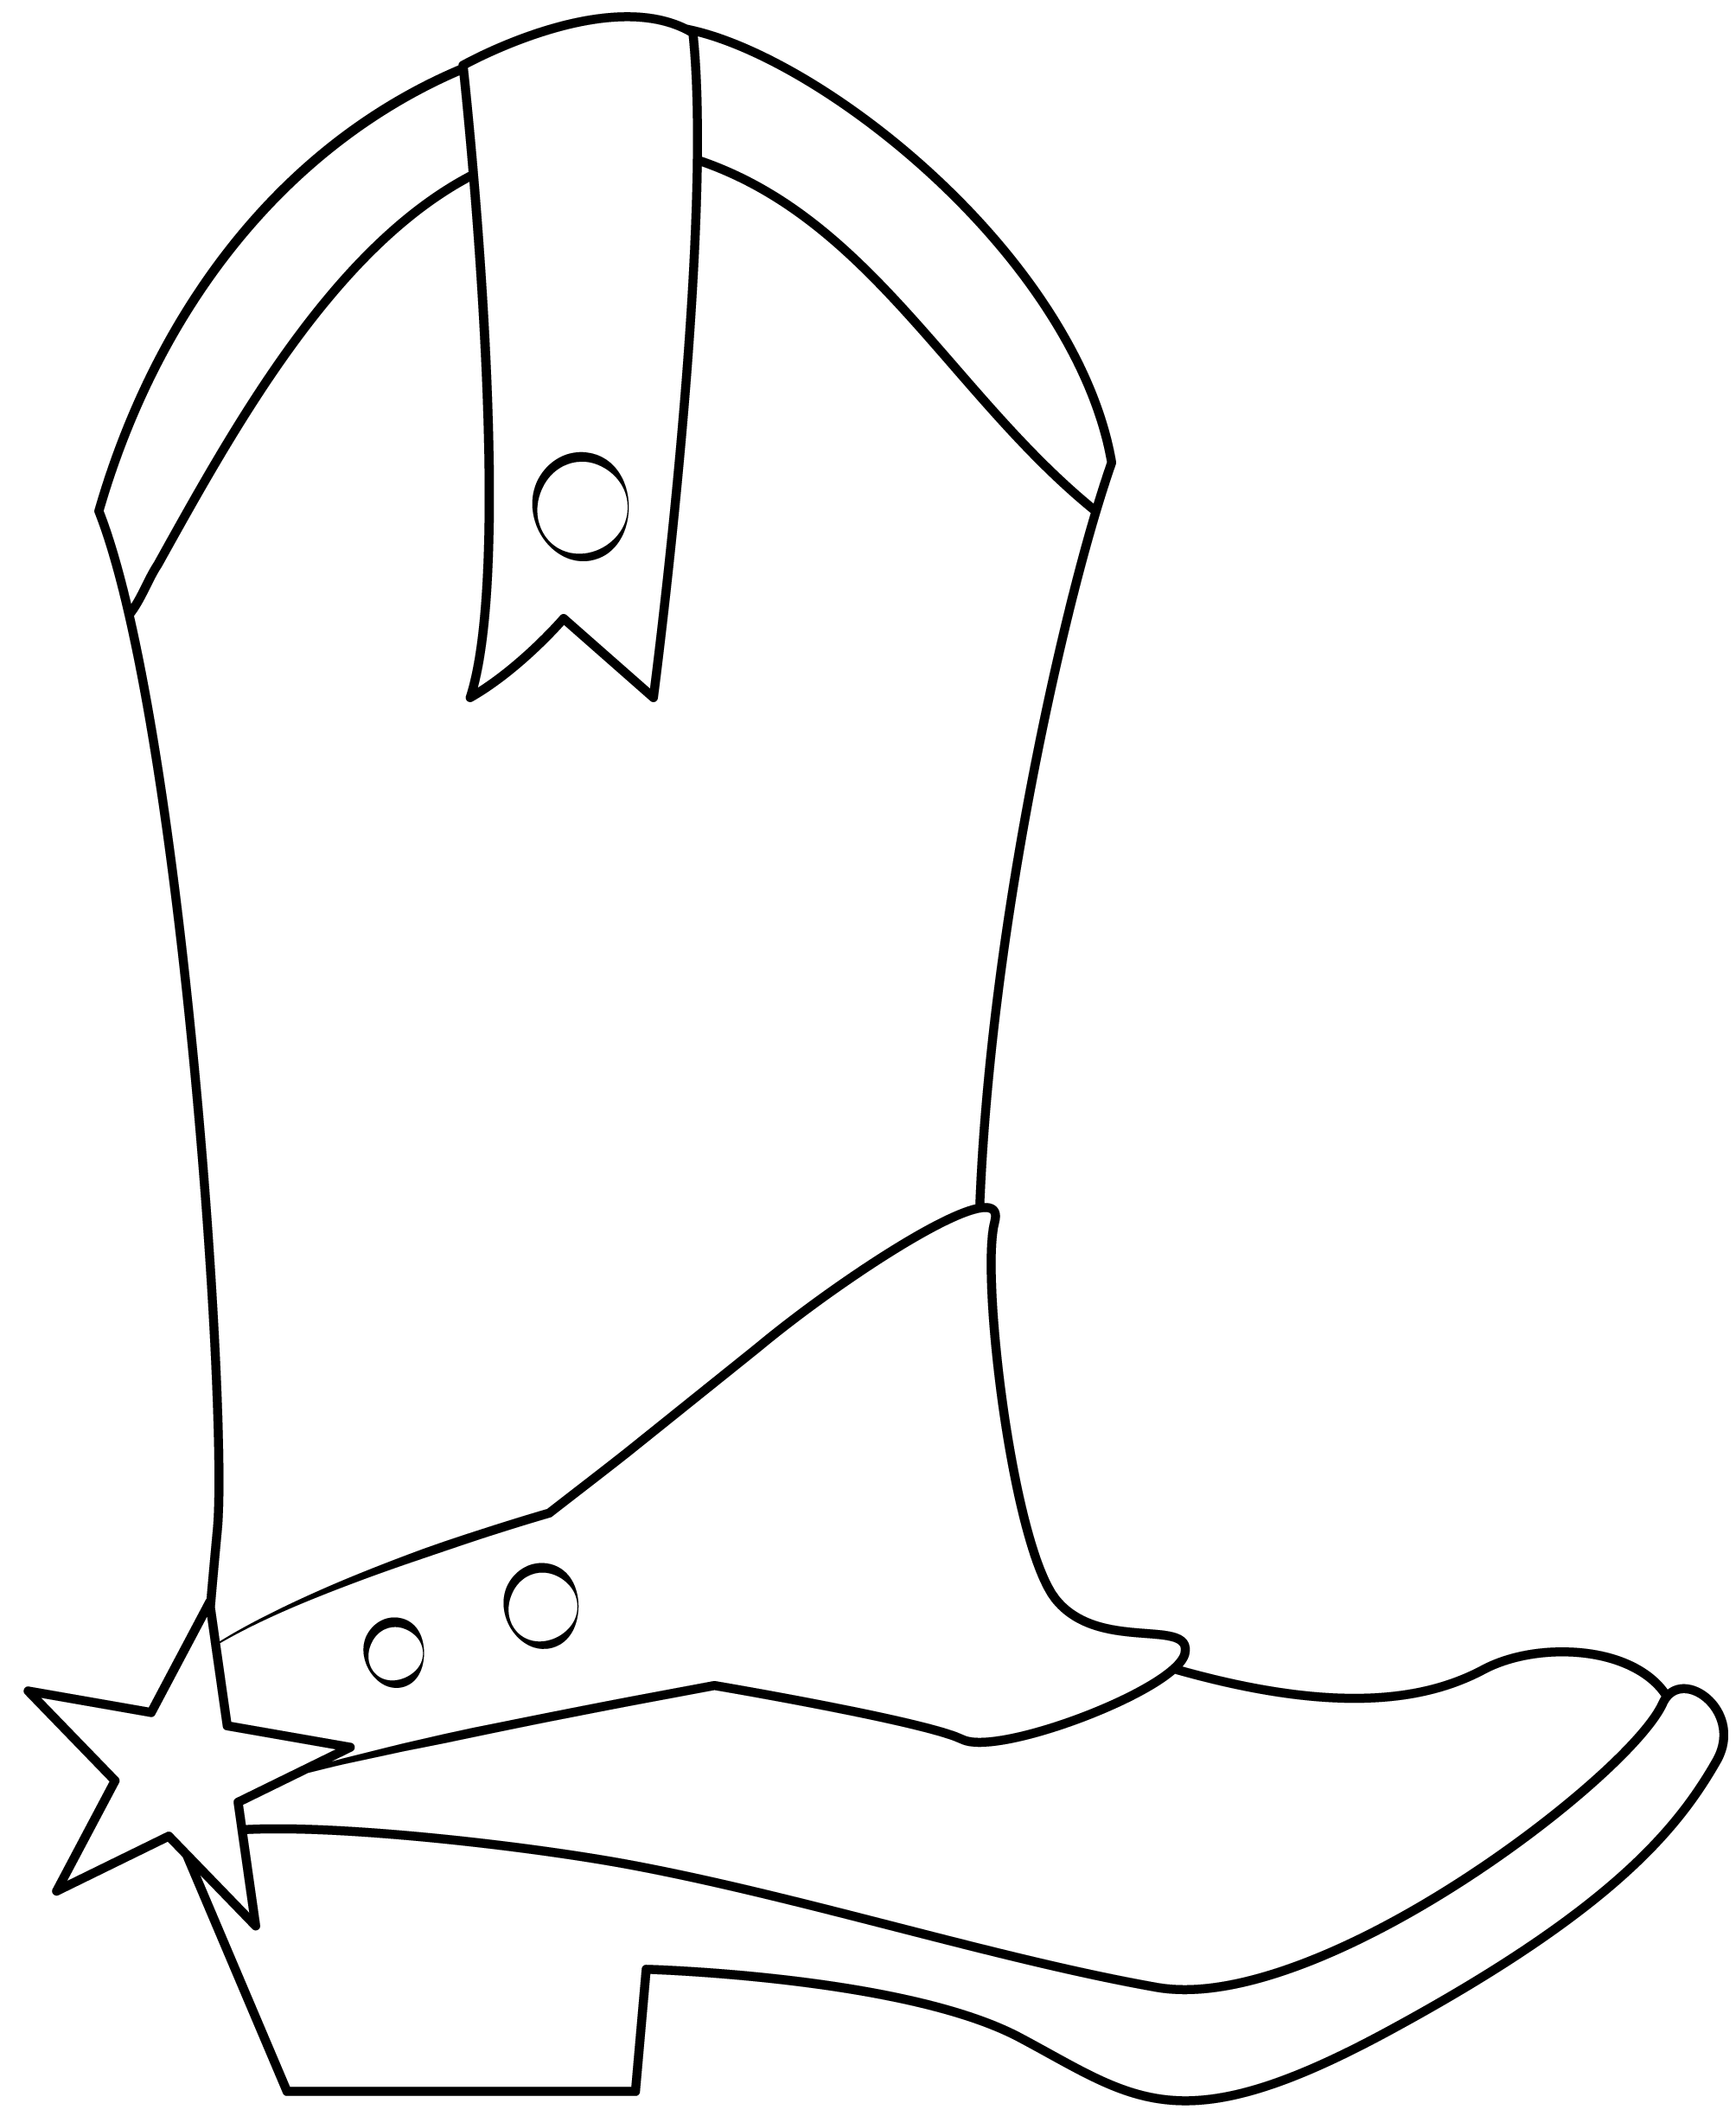 boot outlines - Clip Art Library